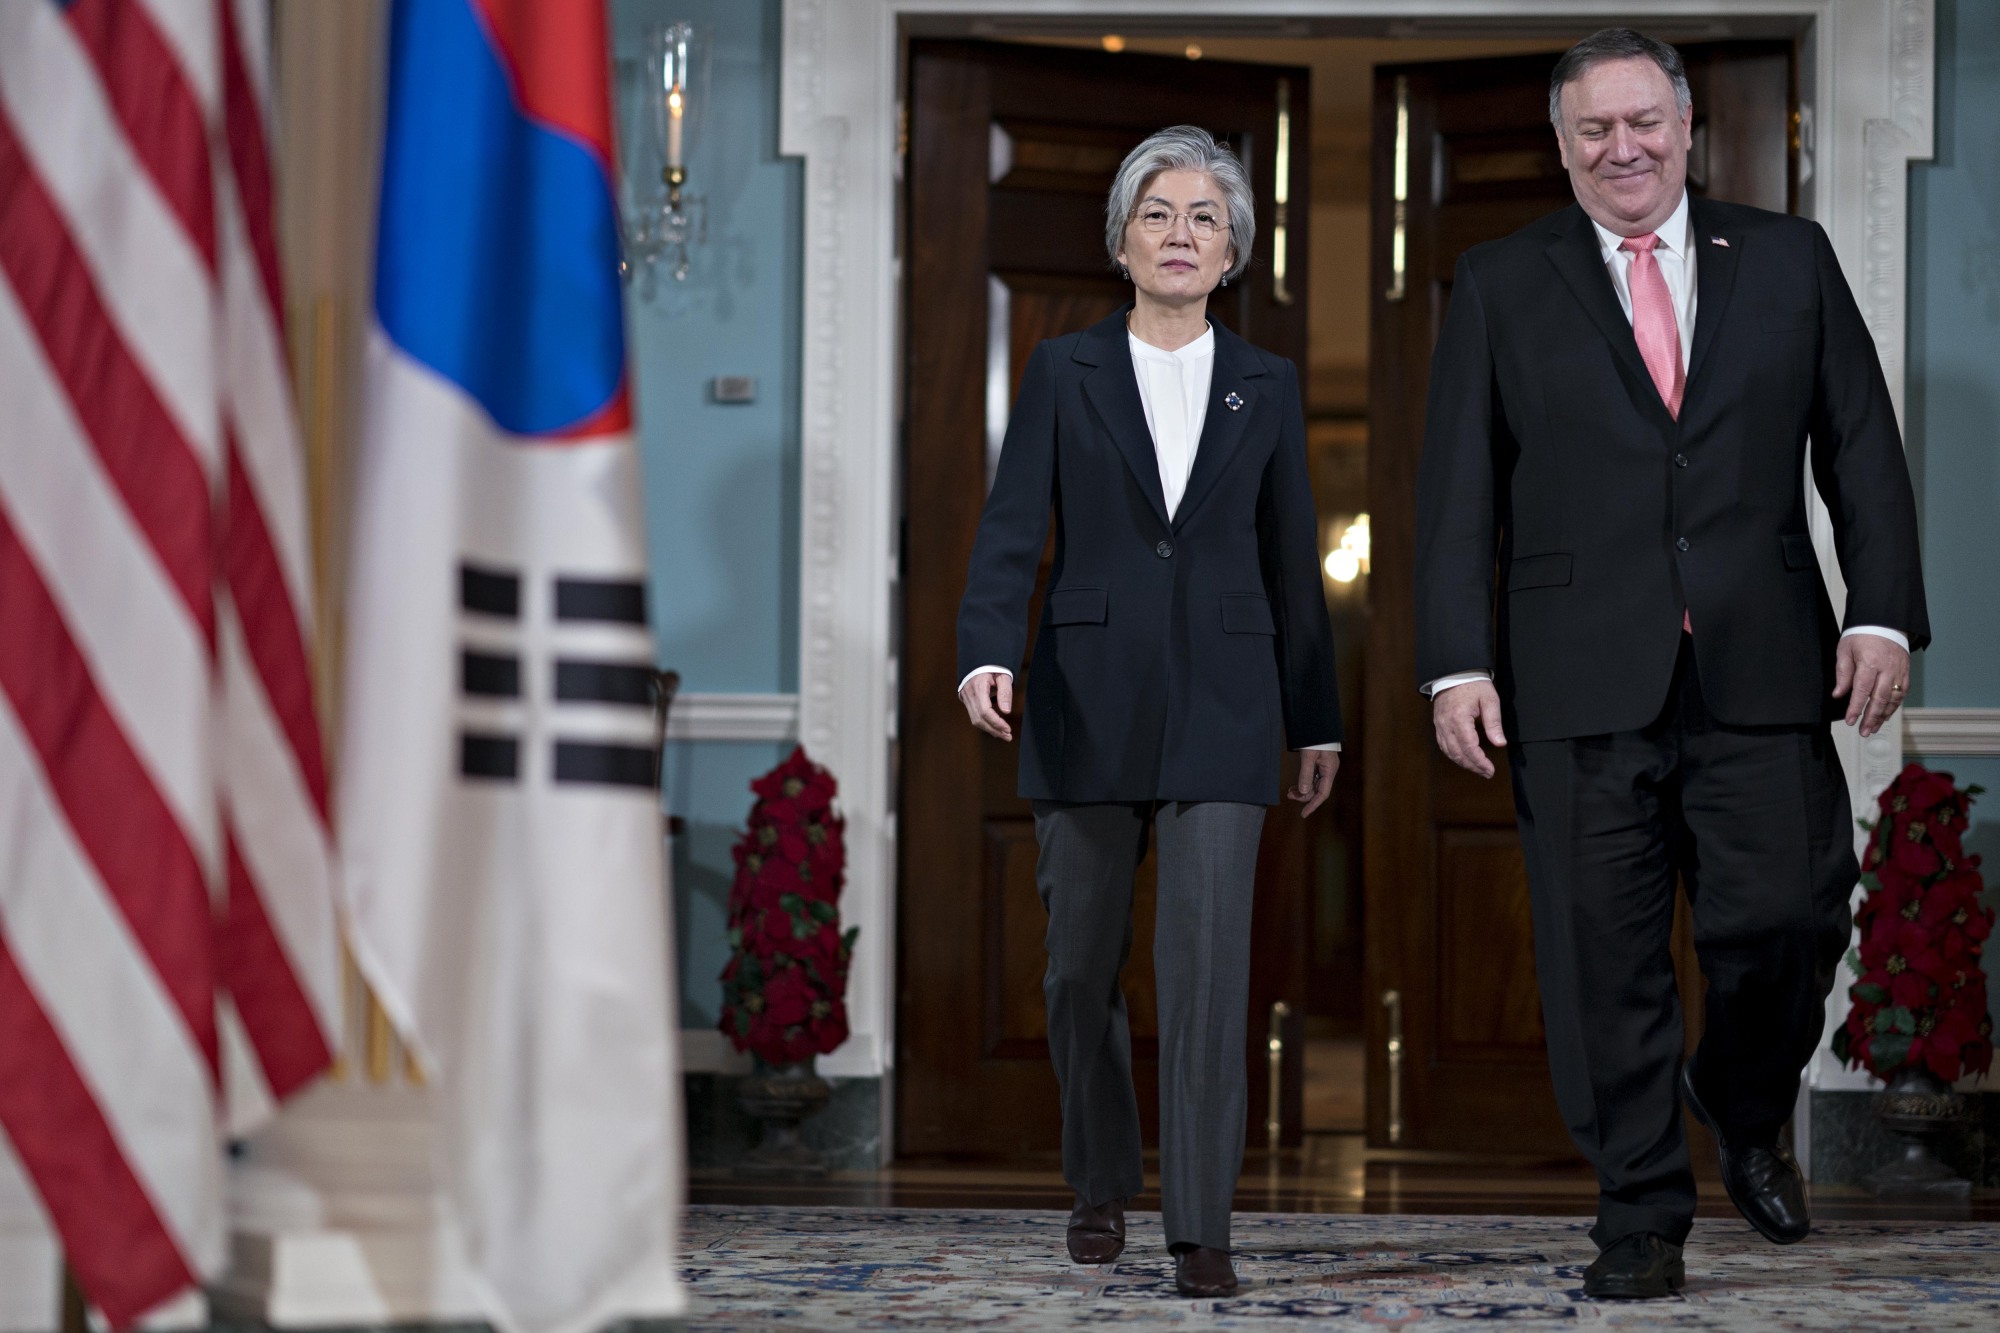 U.S. Secretary of State Mike Pompeo and South Korean Foreign Minister Kang Kyung-wha walk out for a photo opportunity at the State Department in Washington on Thursday. | BLOOMBERG